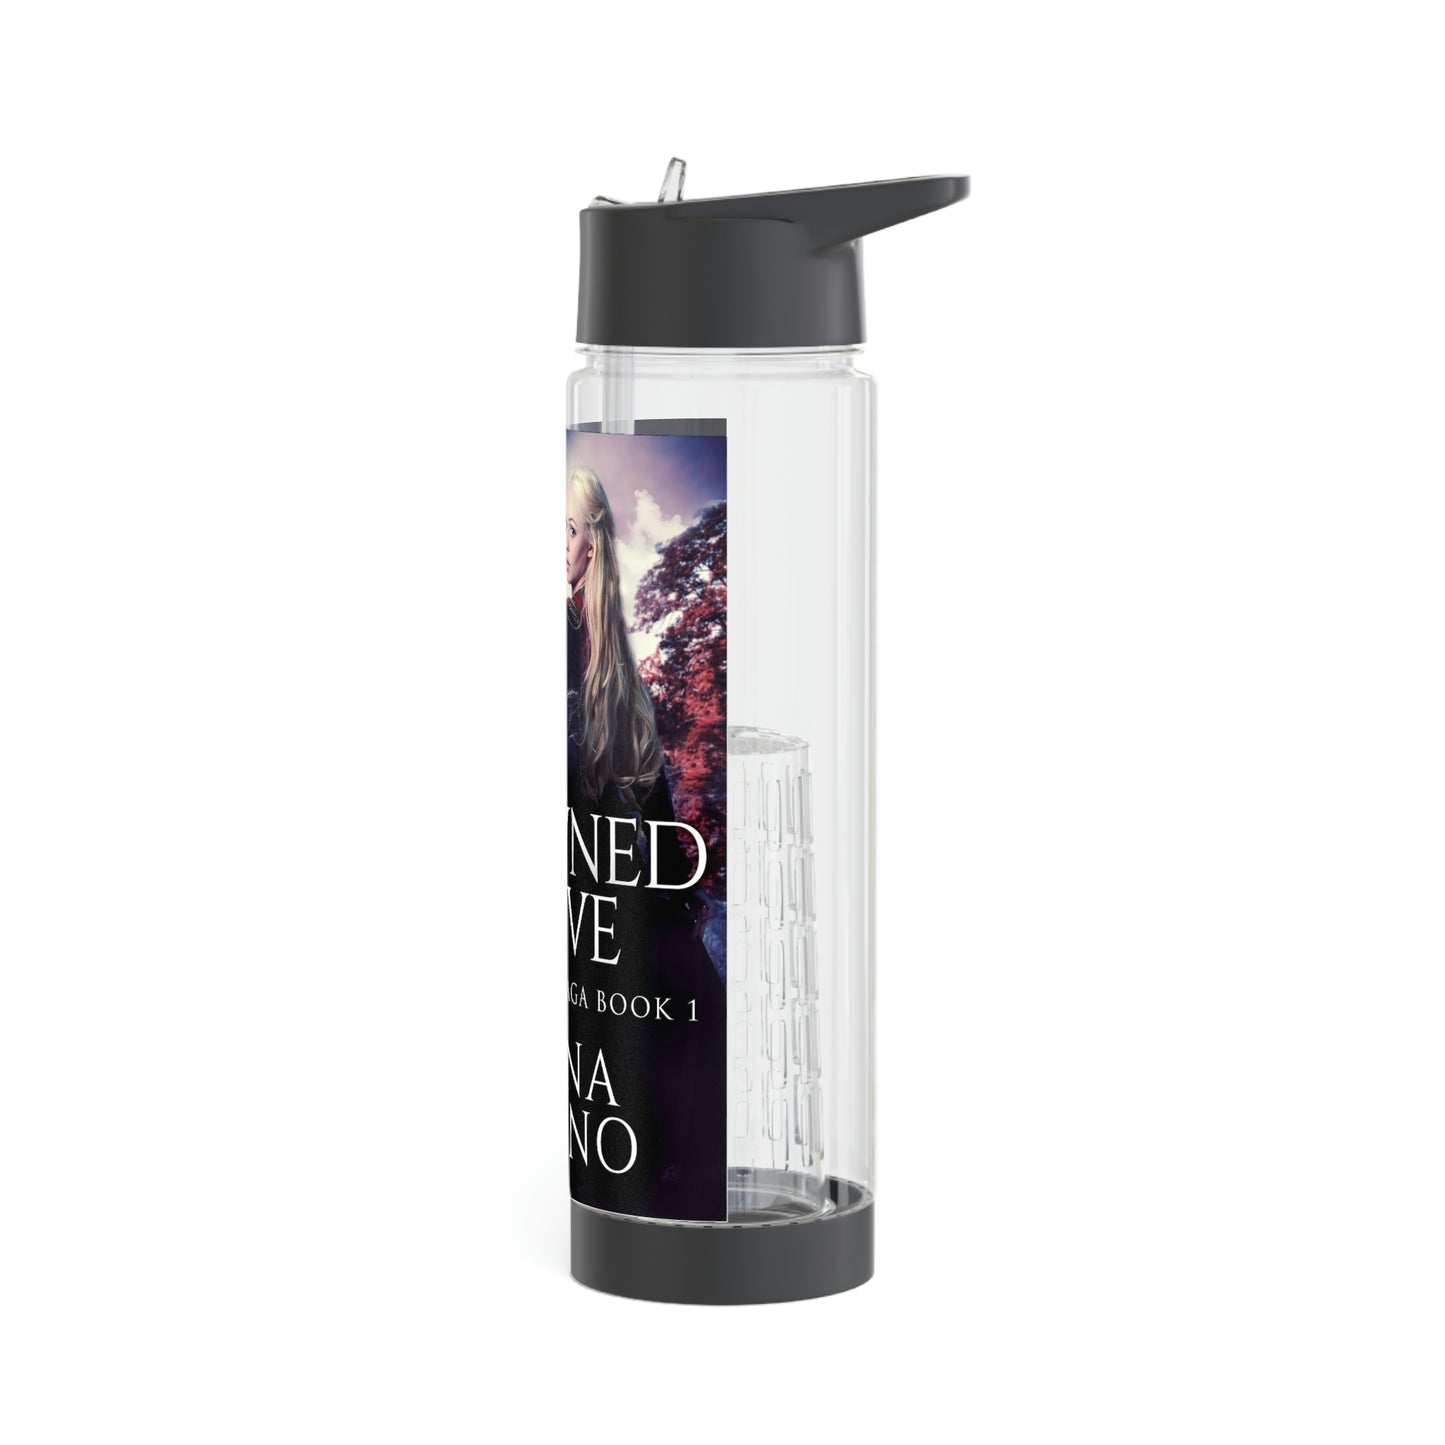 Crowned By Love - Infuser Water Bottle